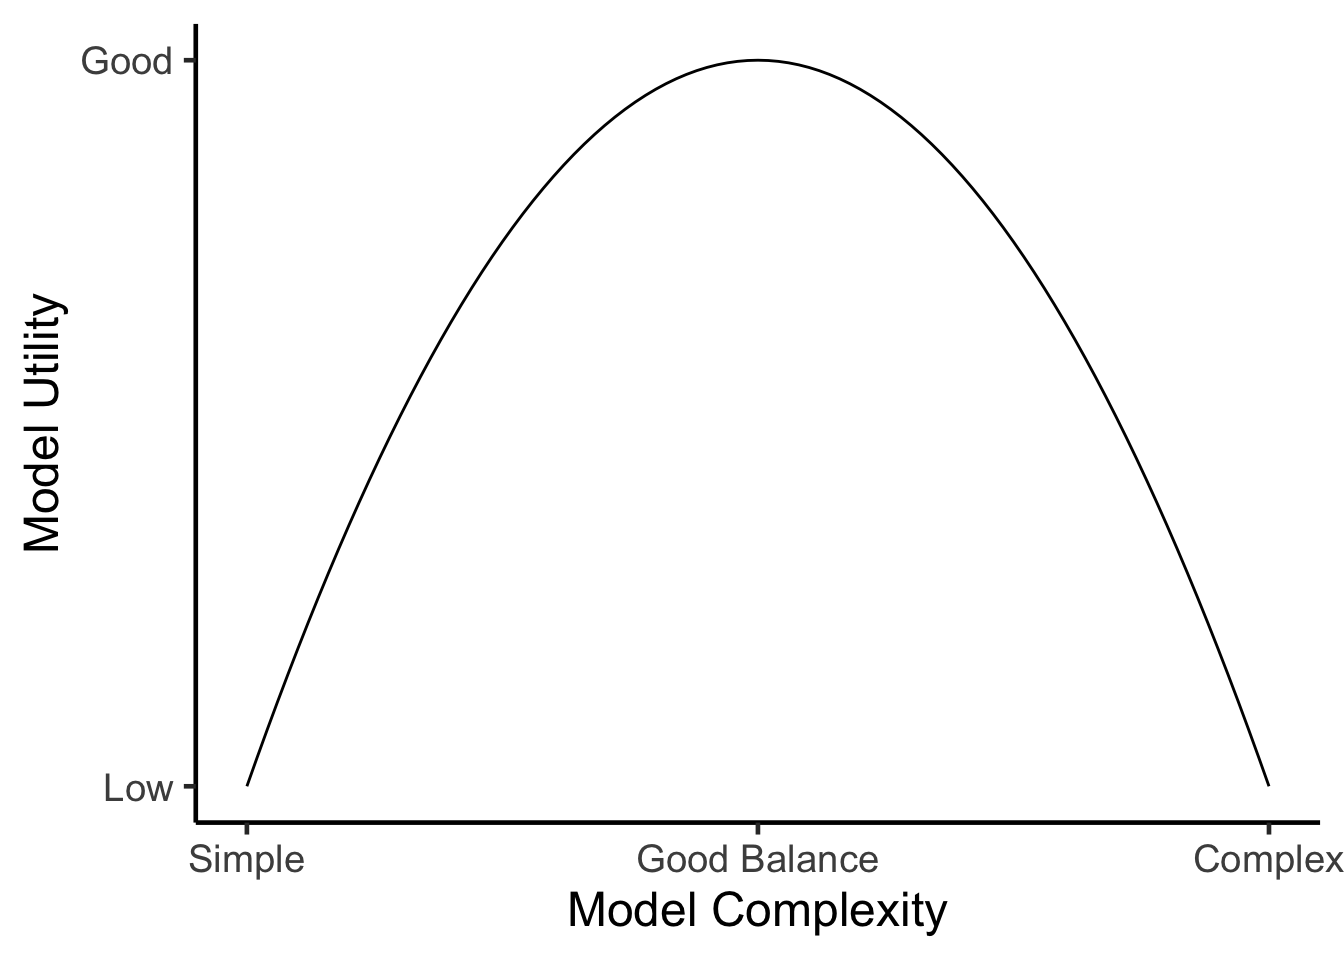 General relationship between model complexity and model utility, whereby the highest model utility is typically achieved for models that are not too simple and not too complex.